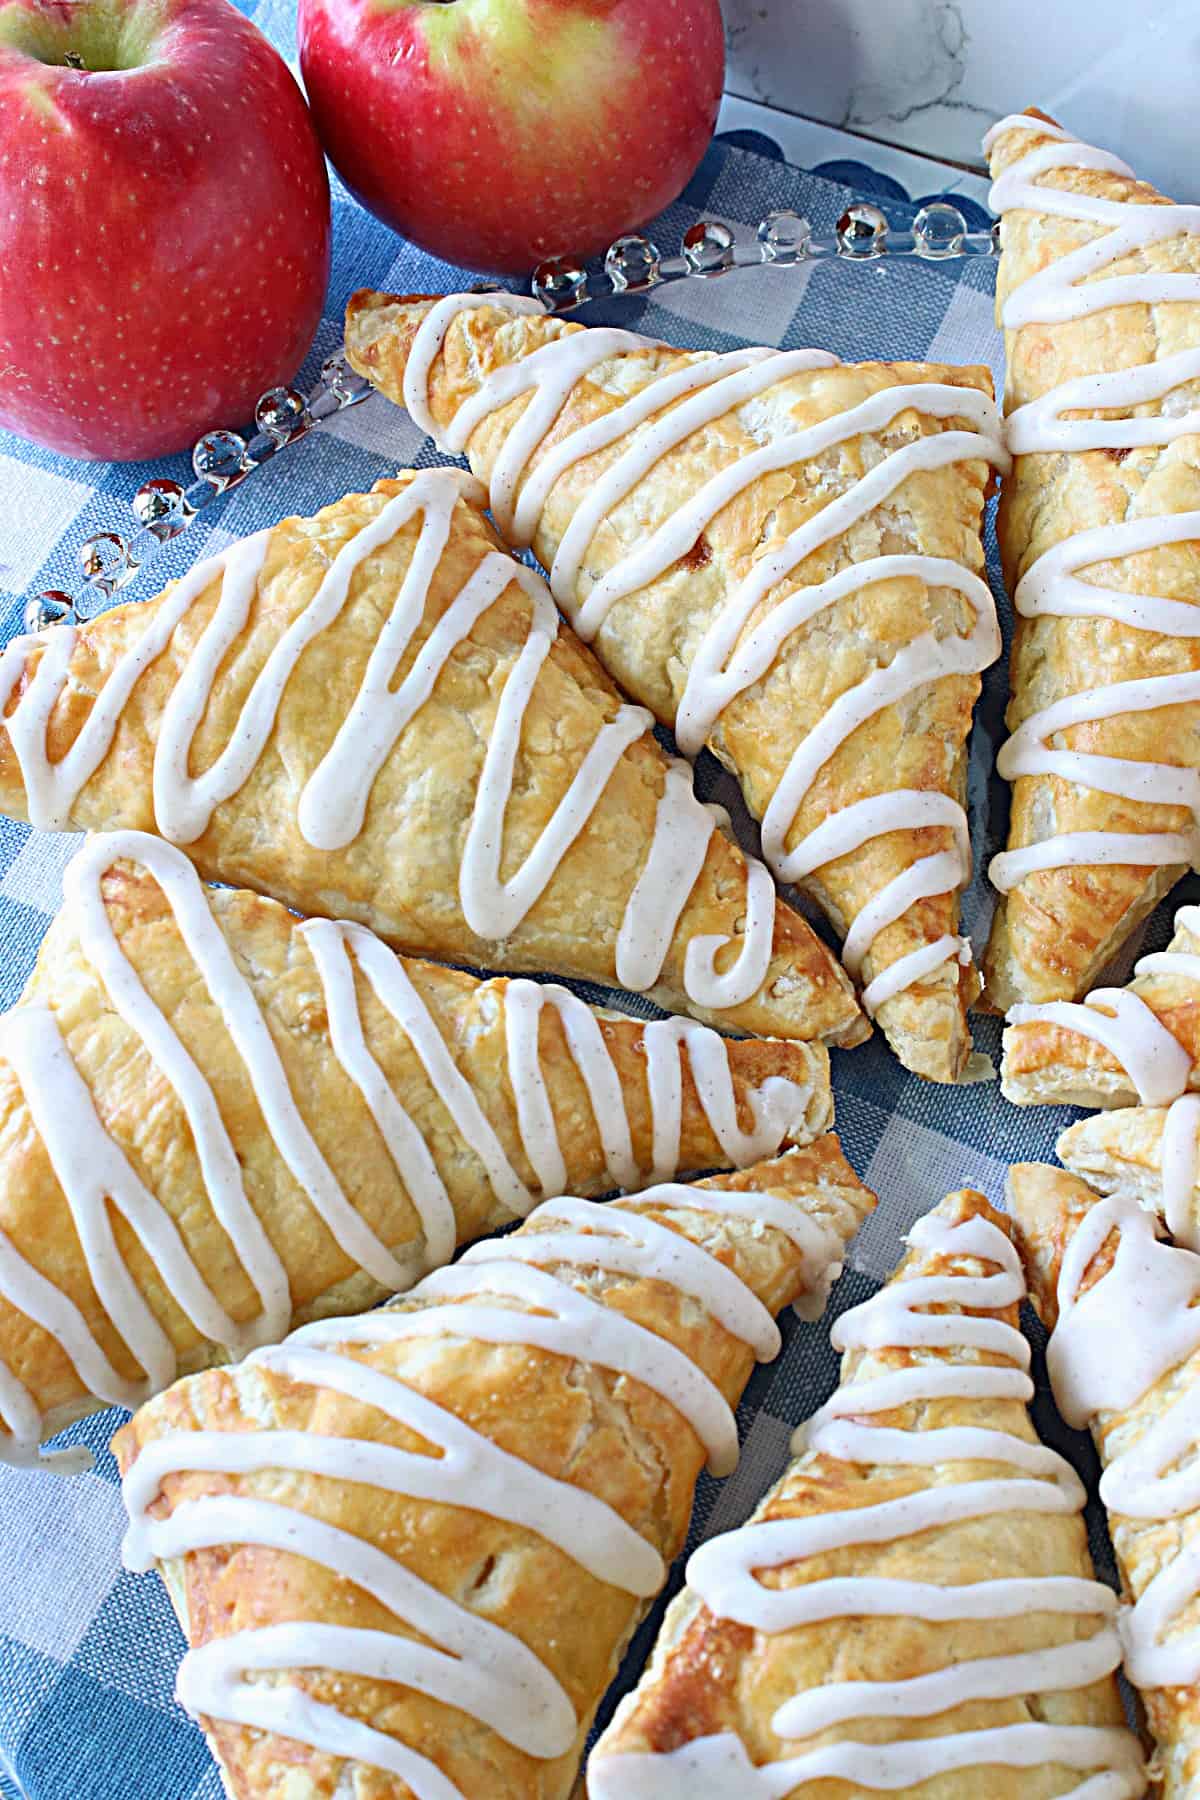 A glass platter filled with Puff Pastry Apple Turnovers with an icing drizzle.